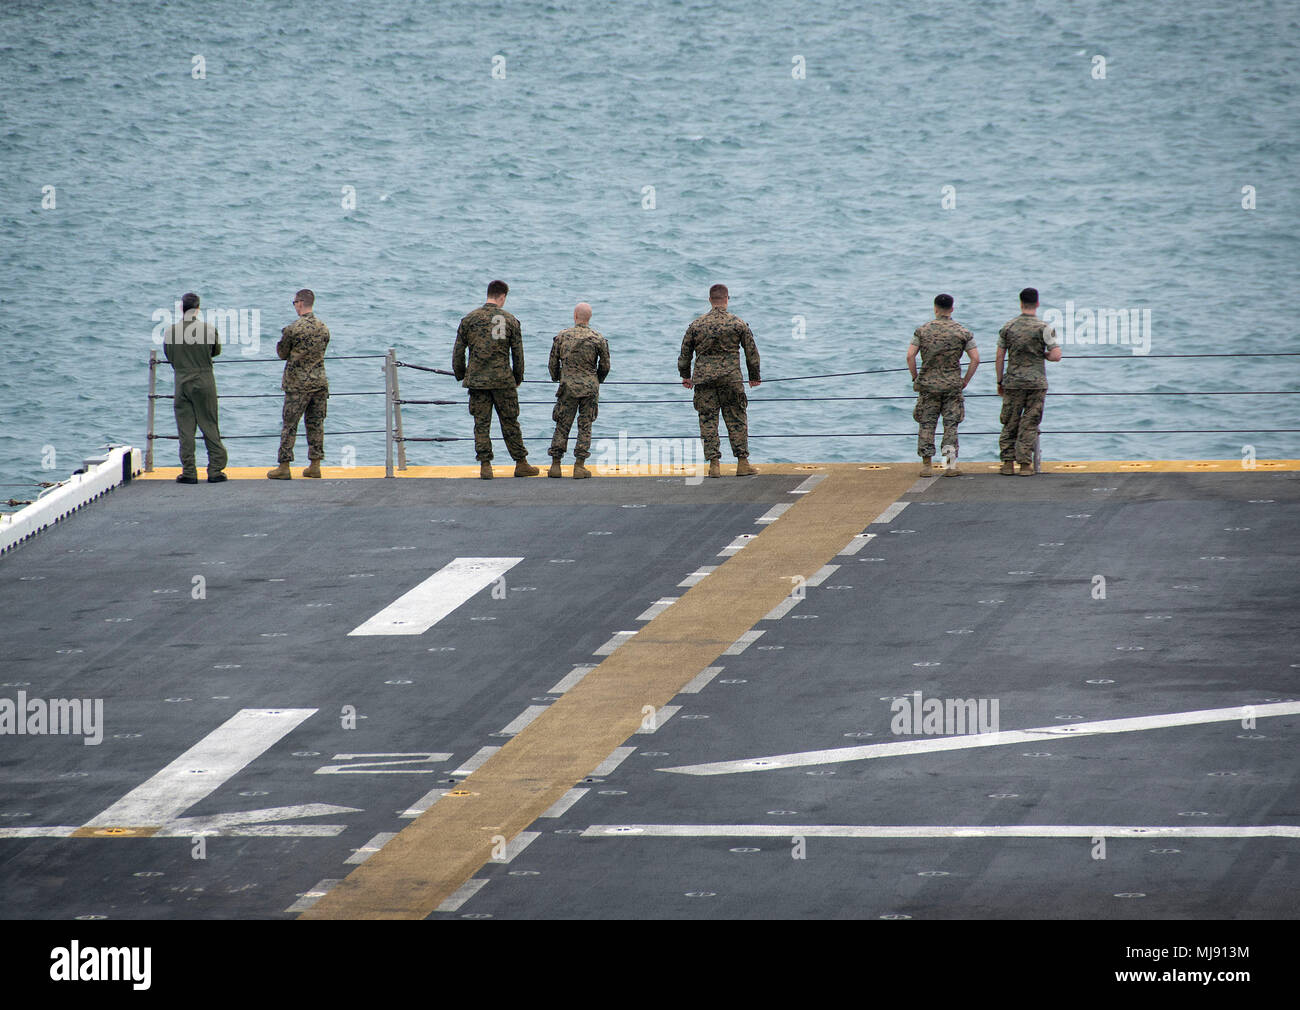 180421-N-RI884-0274 PHILIPPINE SEA (April 21, 2018) Marines aboard the amphibious assault ship USS Wasp (LHD 1) observe the ship pulling into Okinawa to disembark the 31st Marine Expeditionary Unit. Wasp, part of the Wasp Expeditionary Strike Group, has been operating with the MEU for nearly two months as part of a routine patrol in the Indo-Pacific. (U.S. Navy photo by Mass Communication Specialist 1st Class Daniel Barker/Released) Stock Photo